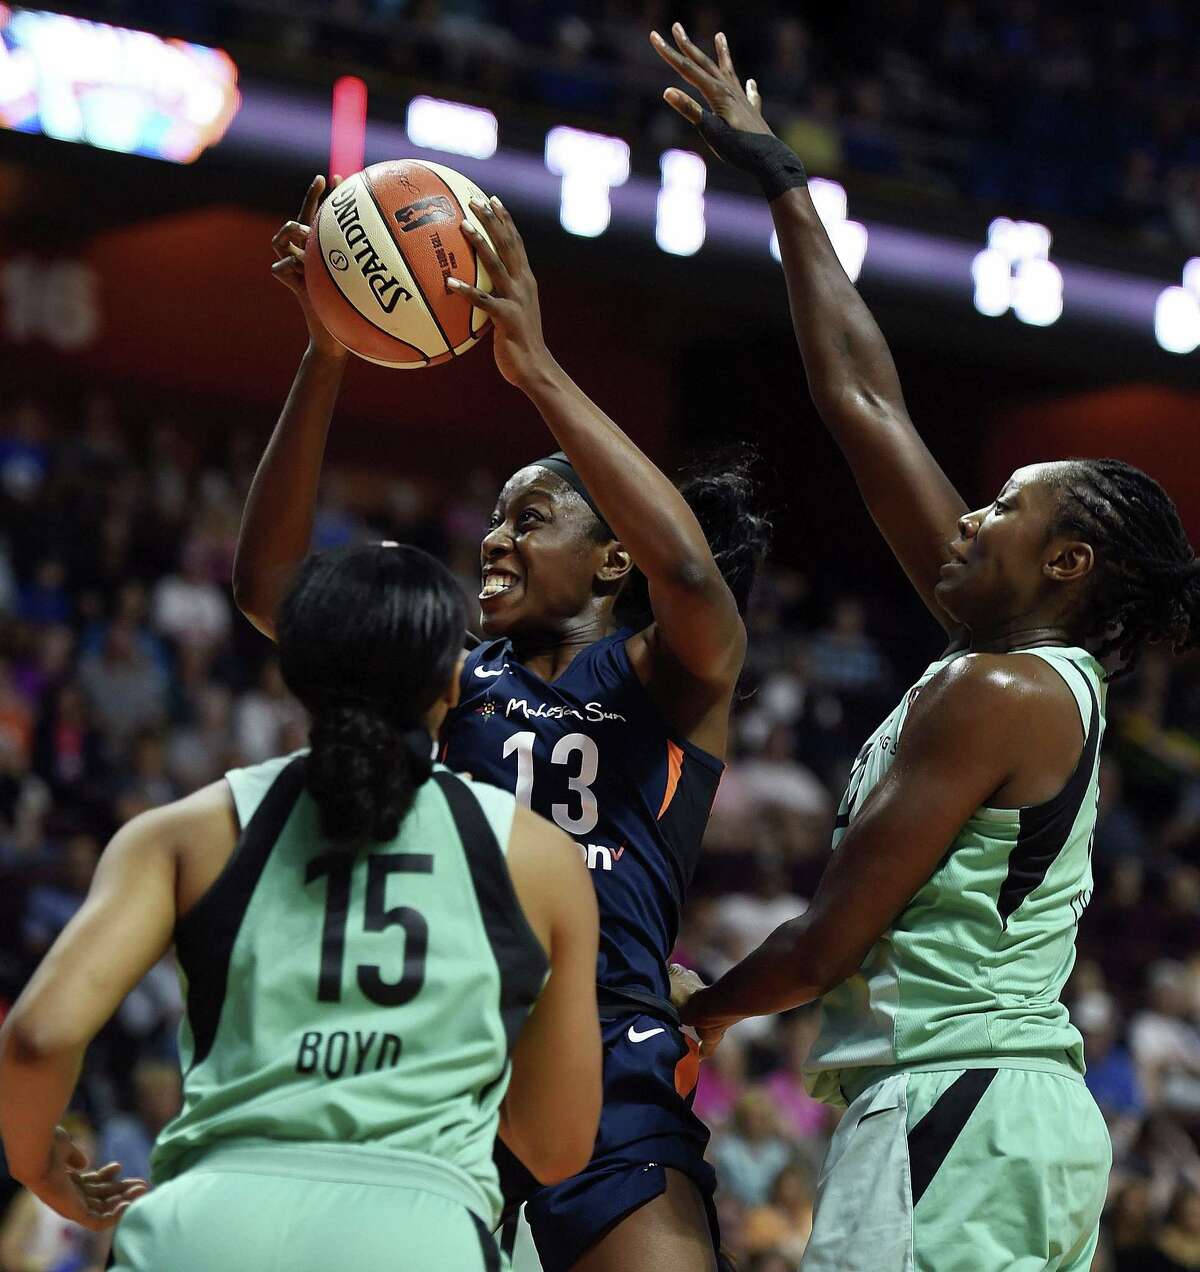 Connecticut Sun forward Chiney Ogwumike (13) was selected to play in the WNBA All-Star game.